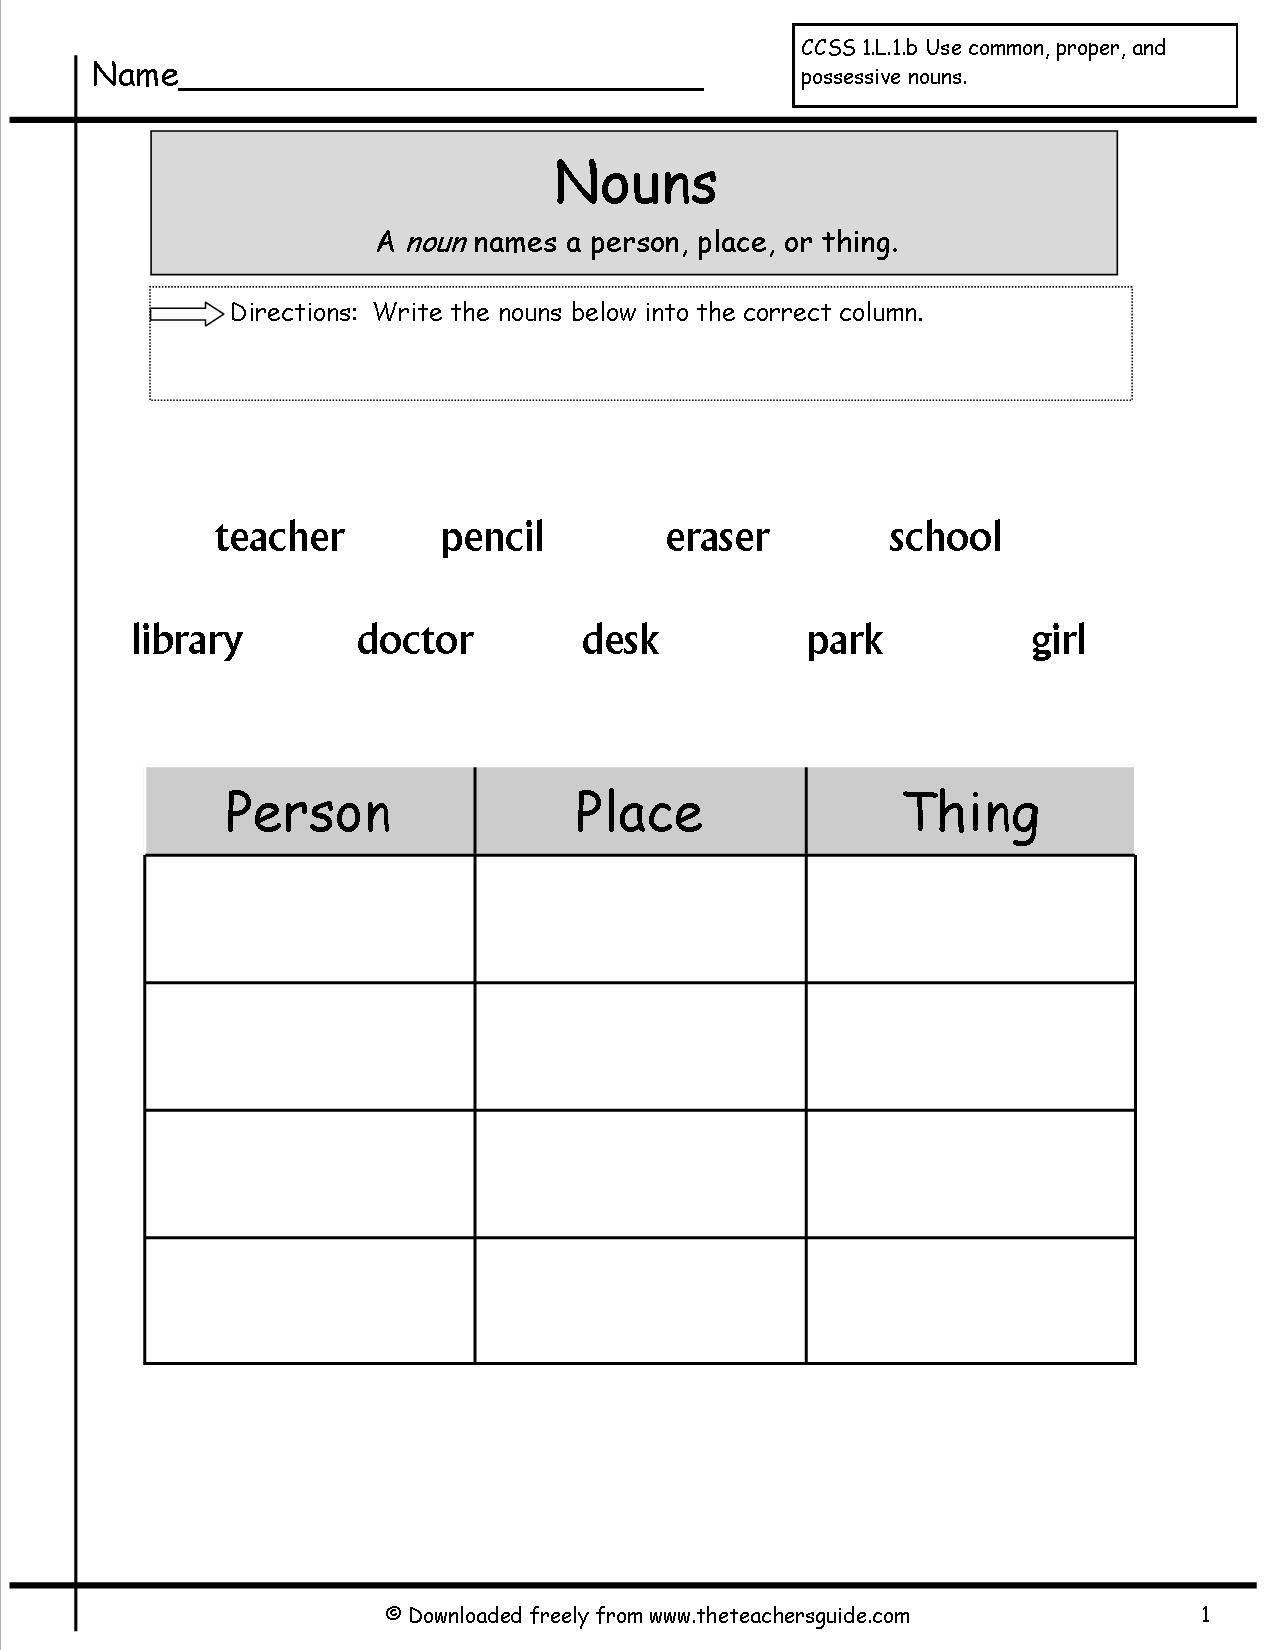 14 Best Images Of Pronouns Worksheets Grade 3 Spanish Pronouns Worksheet Conjunctions